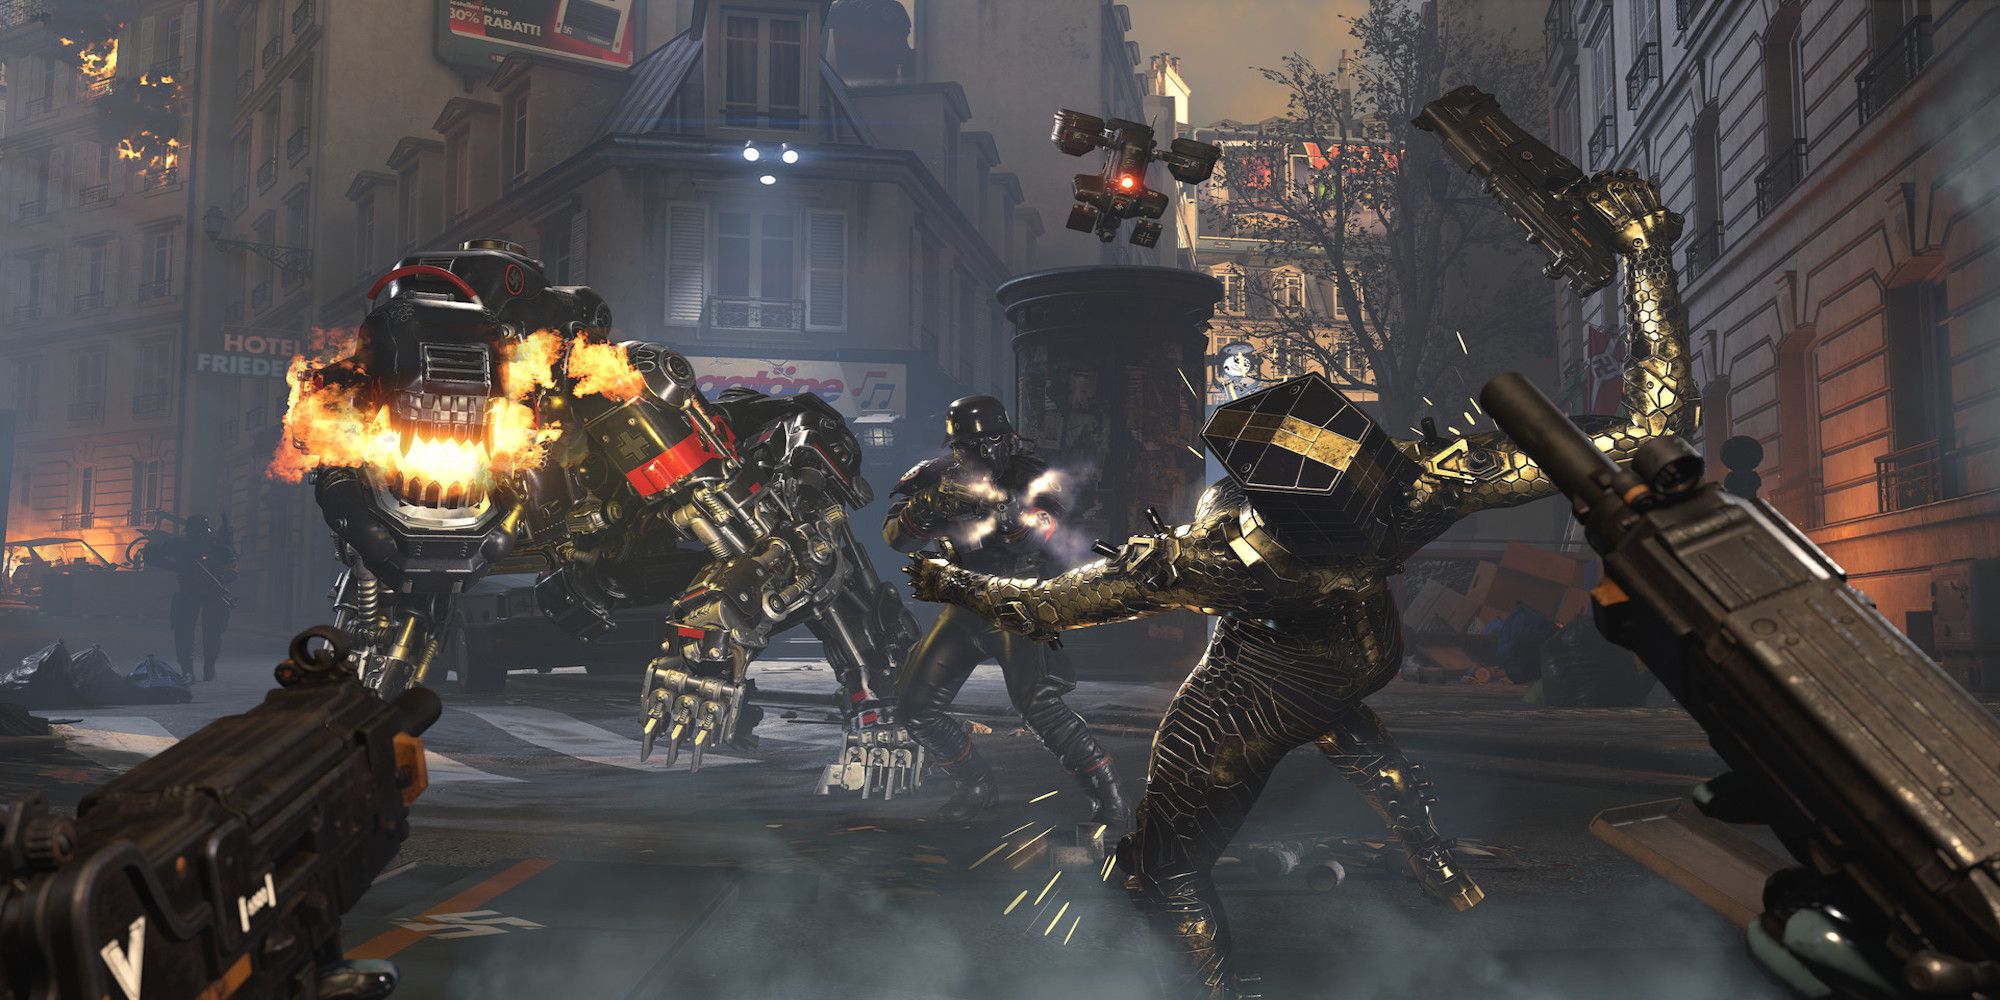 Robotic enemies from Wolfenstein: Youngblood